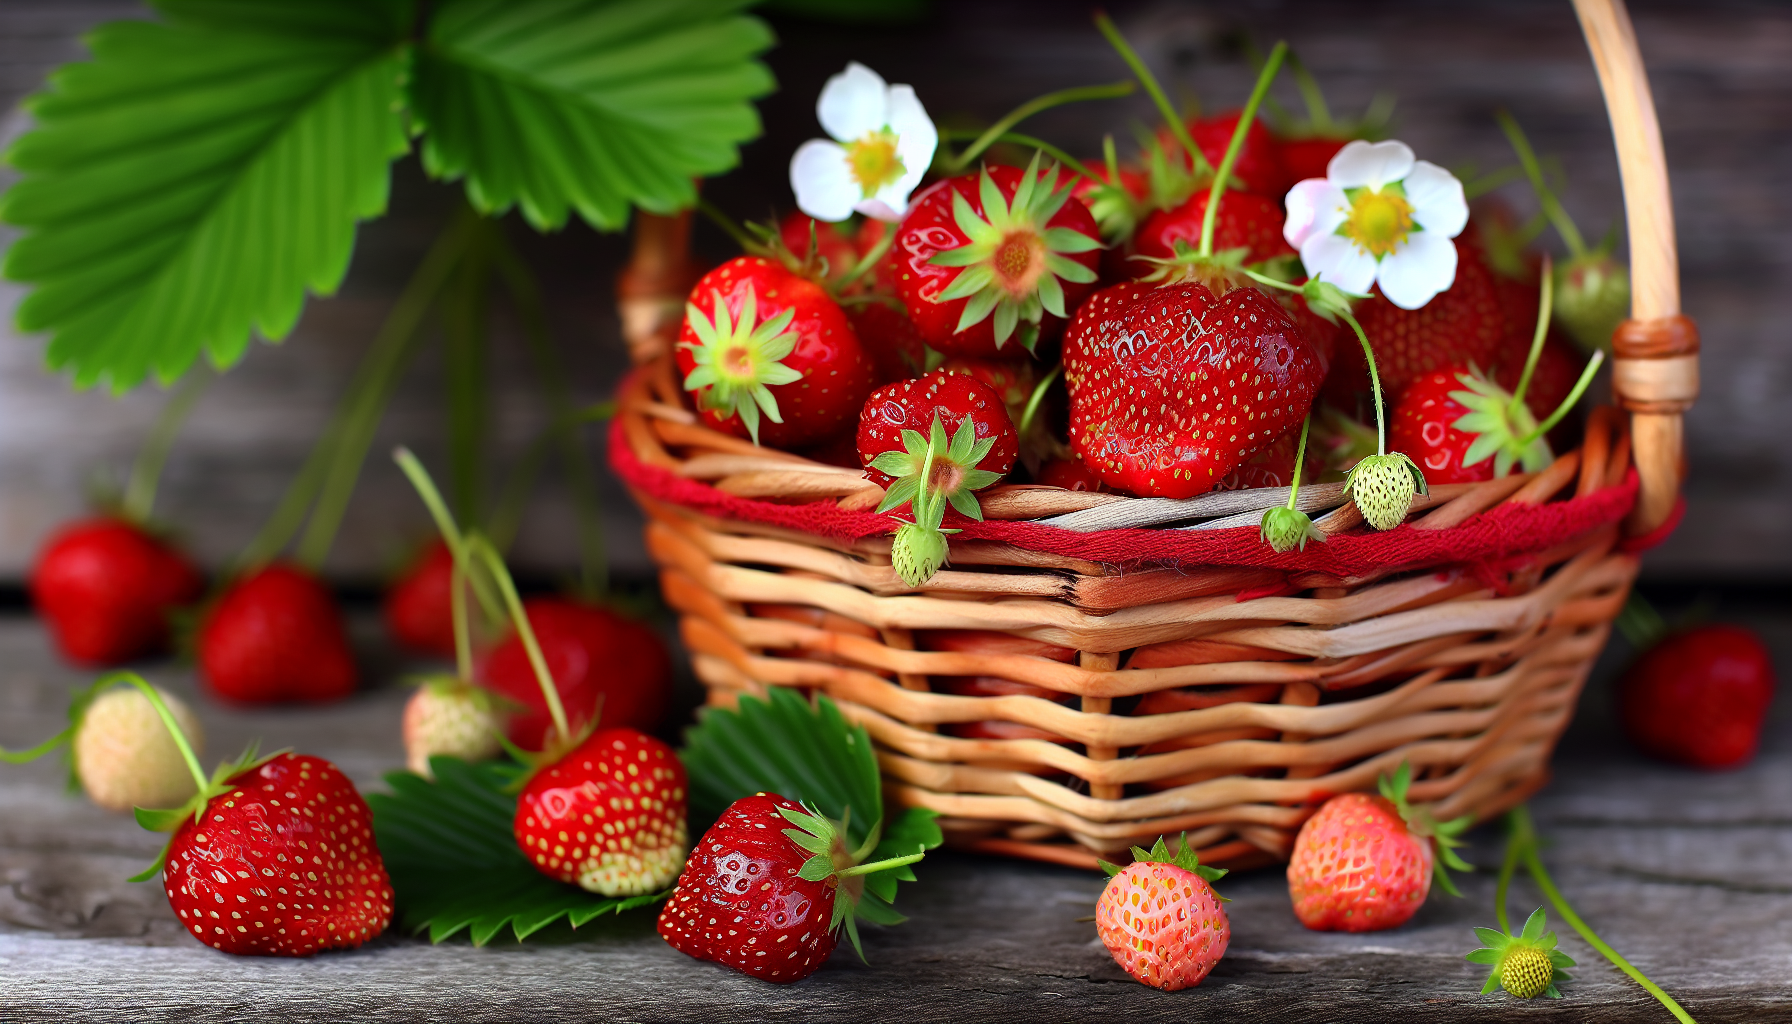 Harvested strawberries in a basket with leaves and flowers